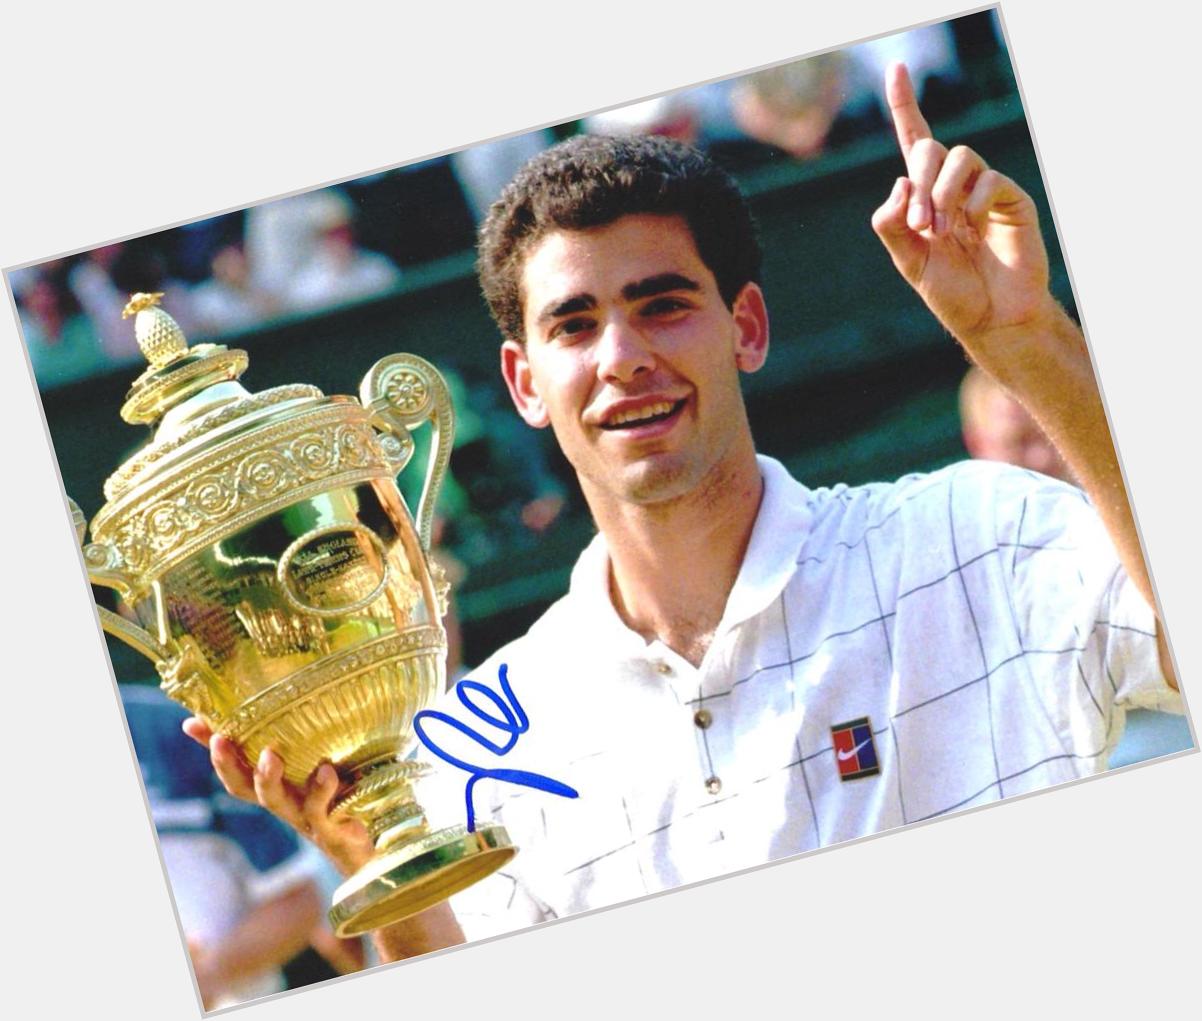 Happy Bday former world and one of the greatest tennis players ever with 14grand slams \"Pistol Pete\" Pete Sampras 